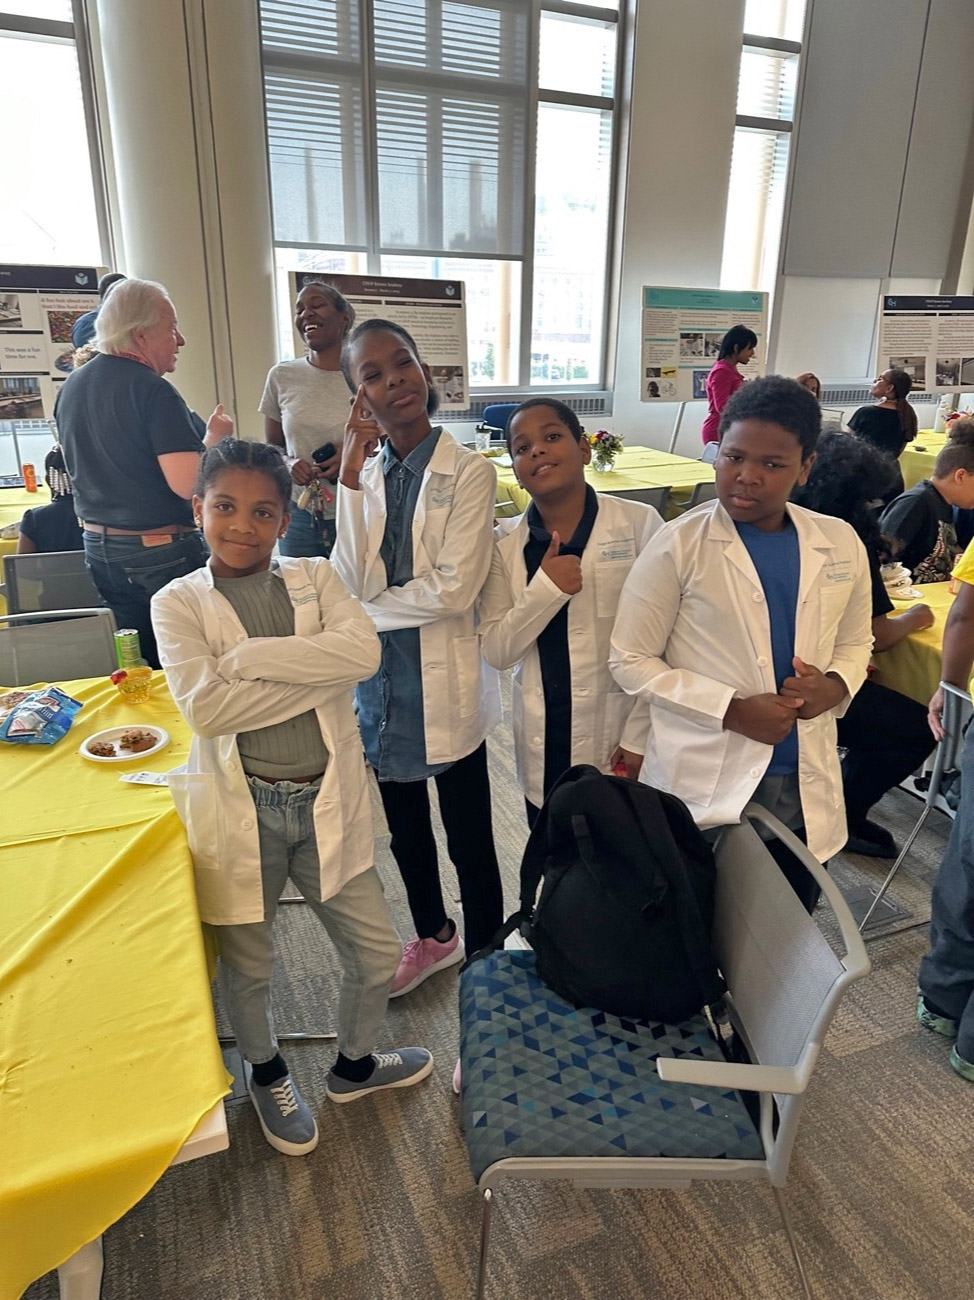 Amyrah, Mai'Lynn, Ayden and Waheed show off their white coats after completing the CHOP Science Academy program.